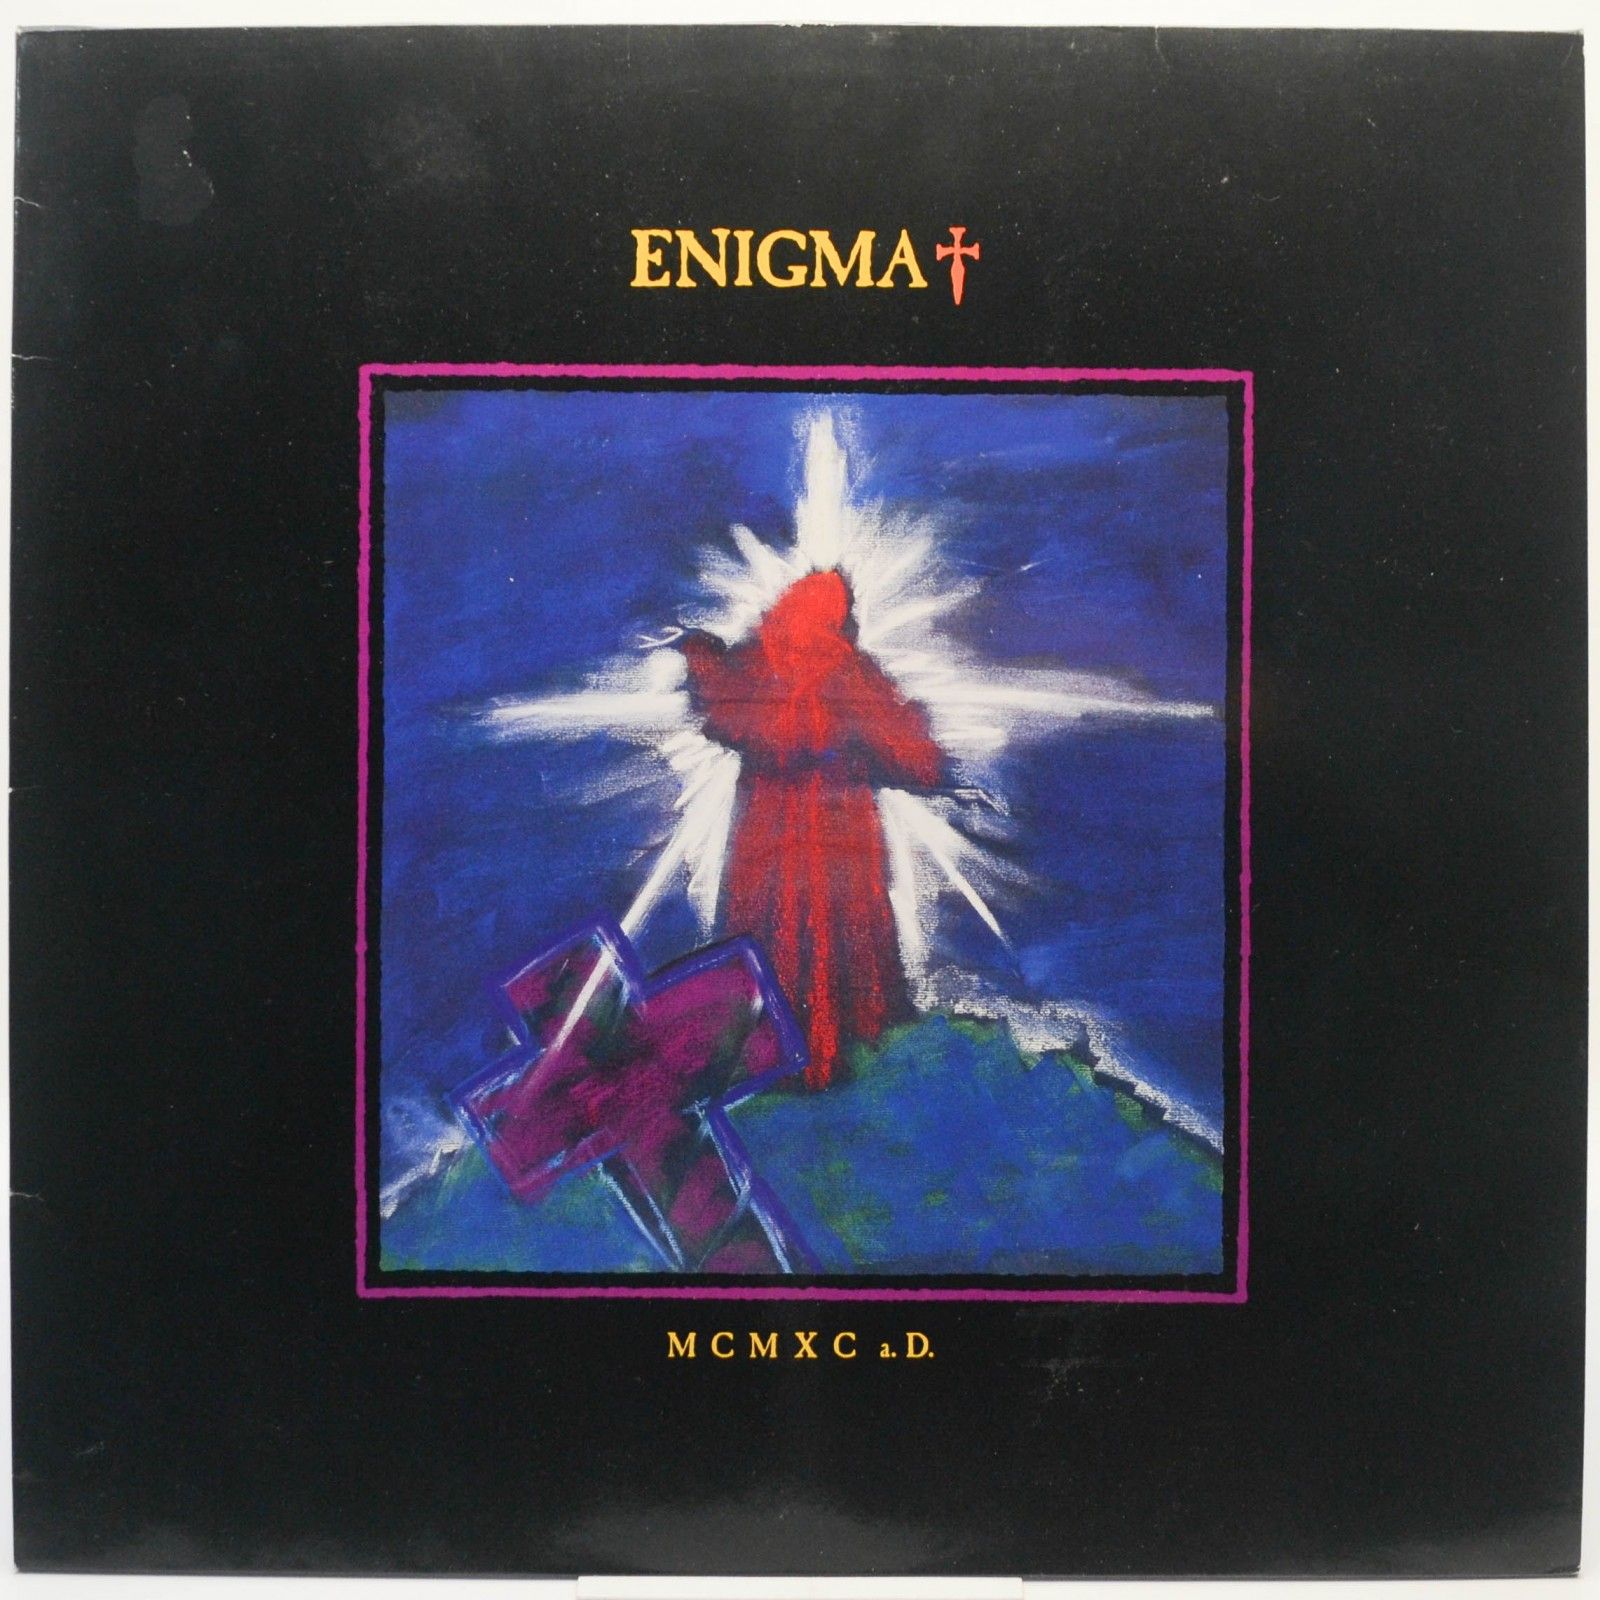 Enigma — MCMXC a.D., 1990